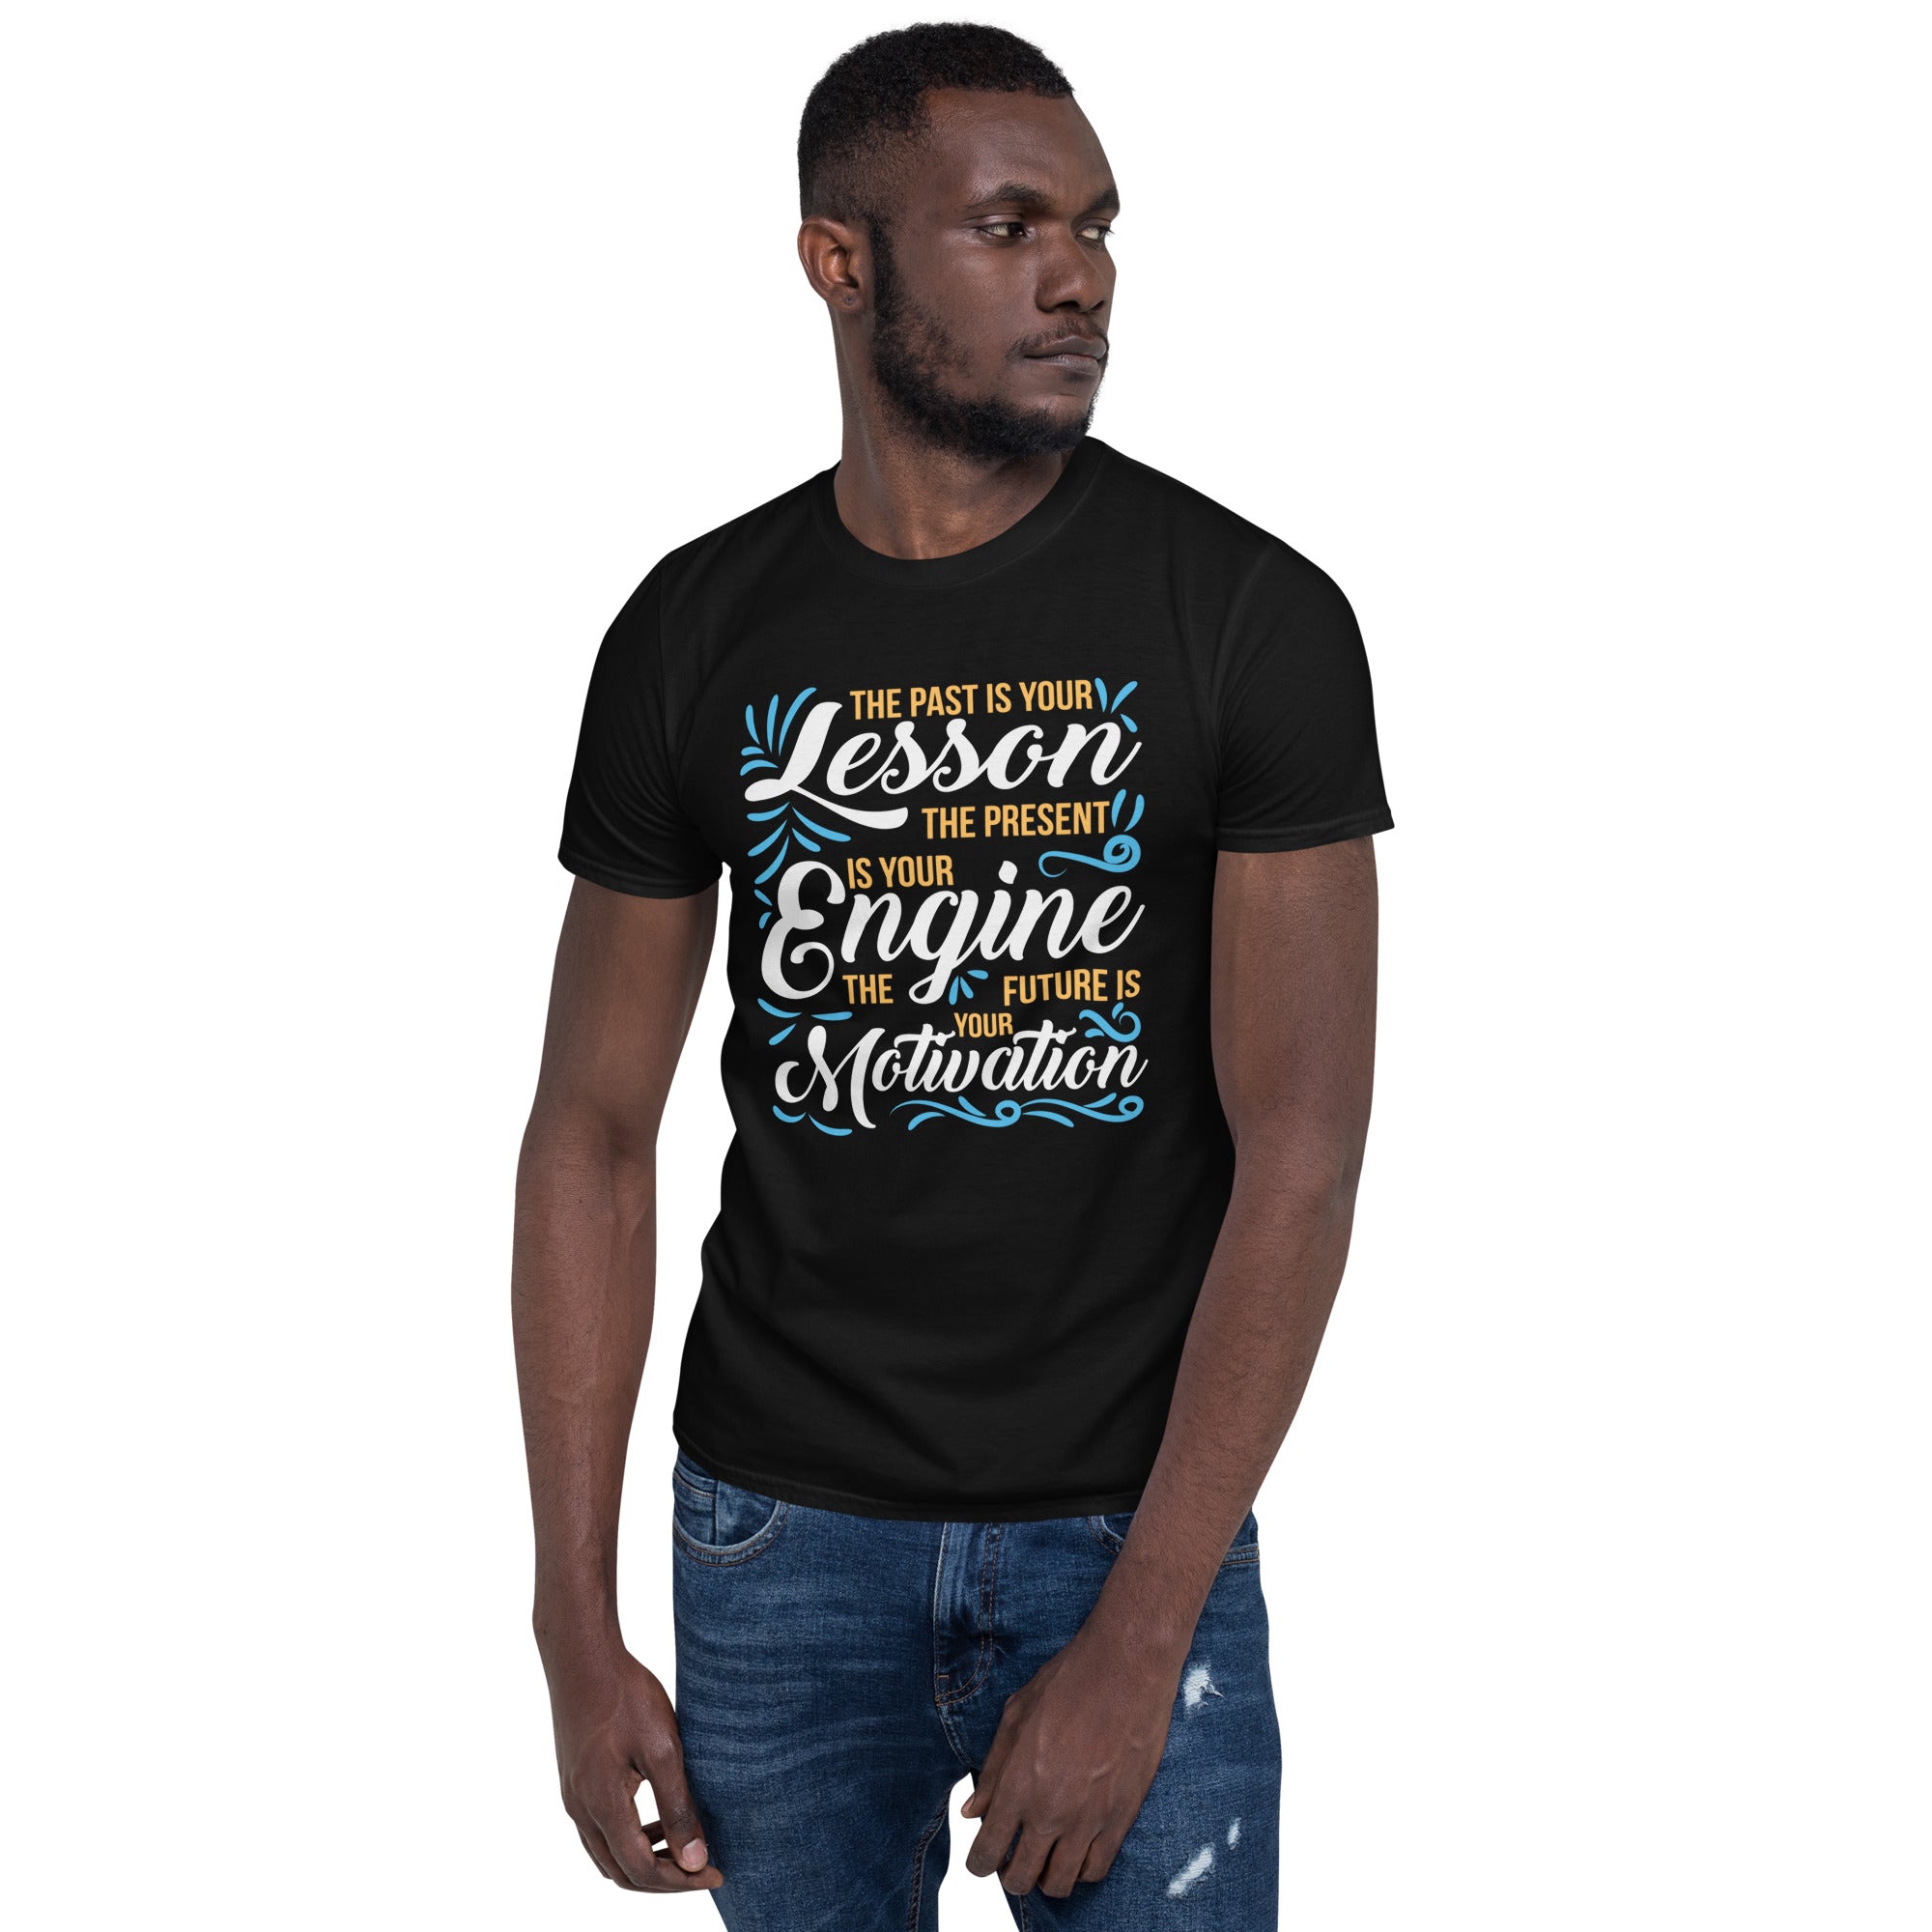 The Past Is Your - Short-Sleeve Unisex T-Shirt